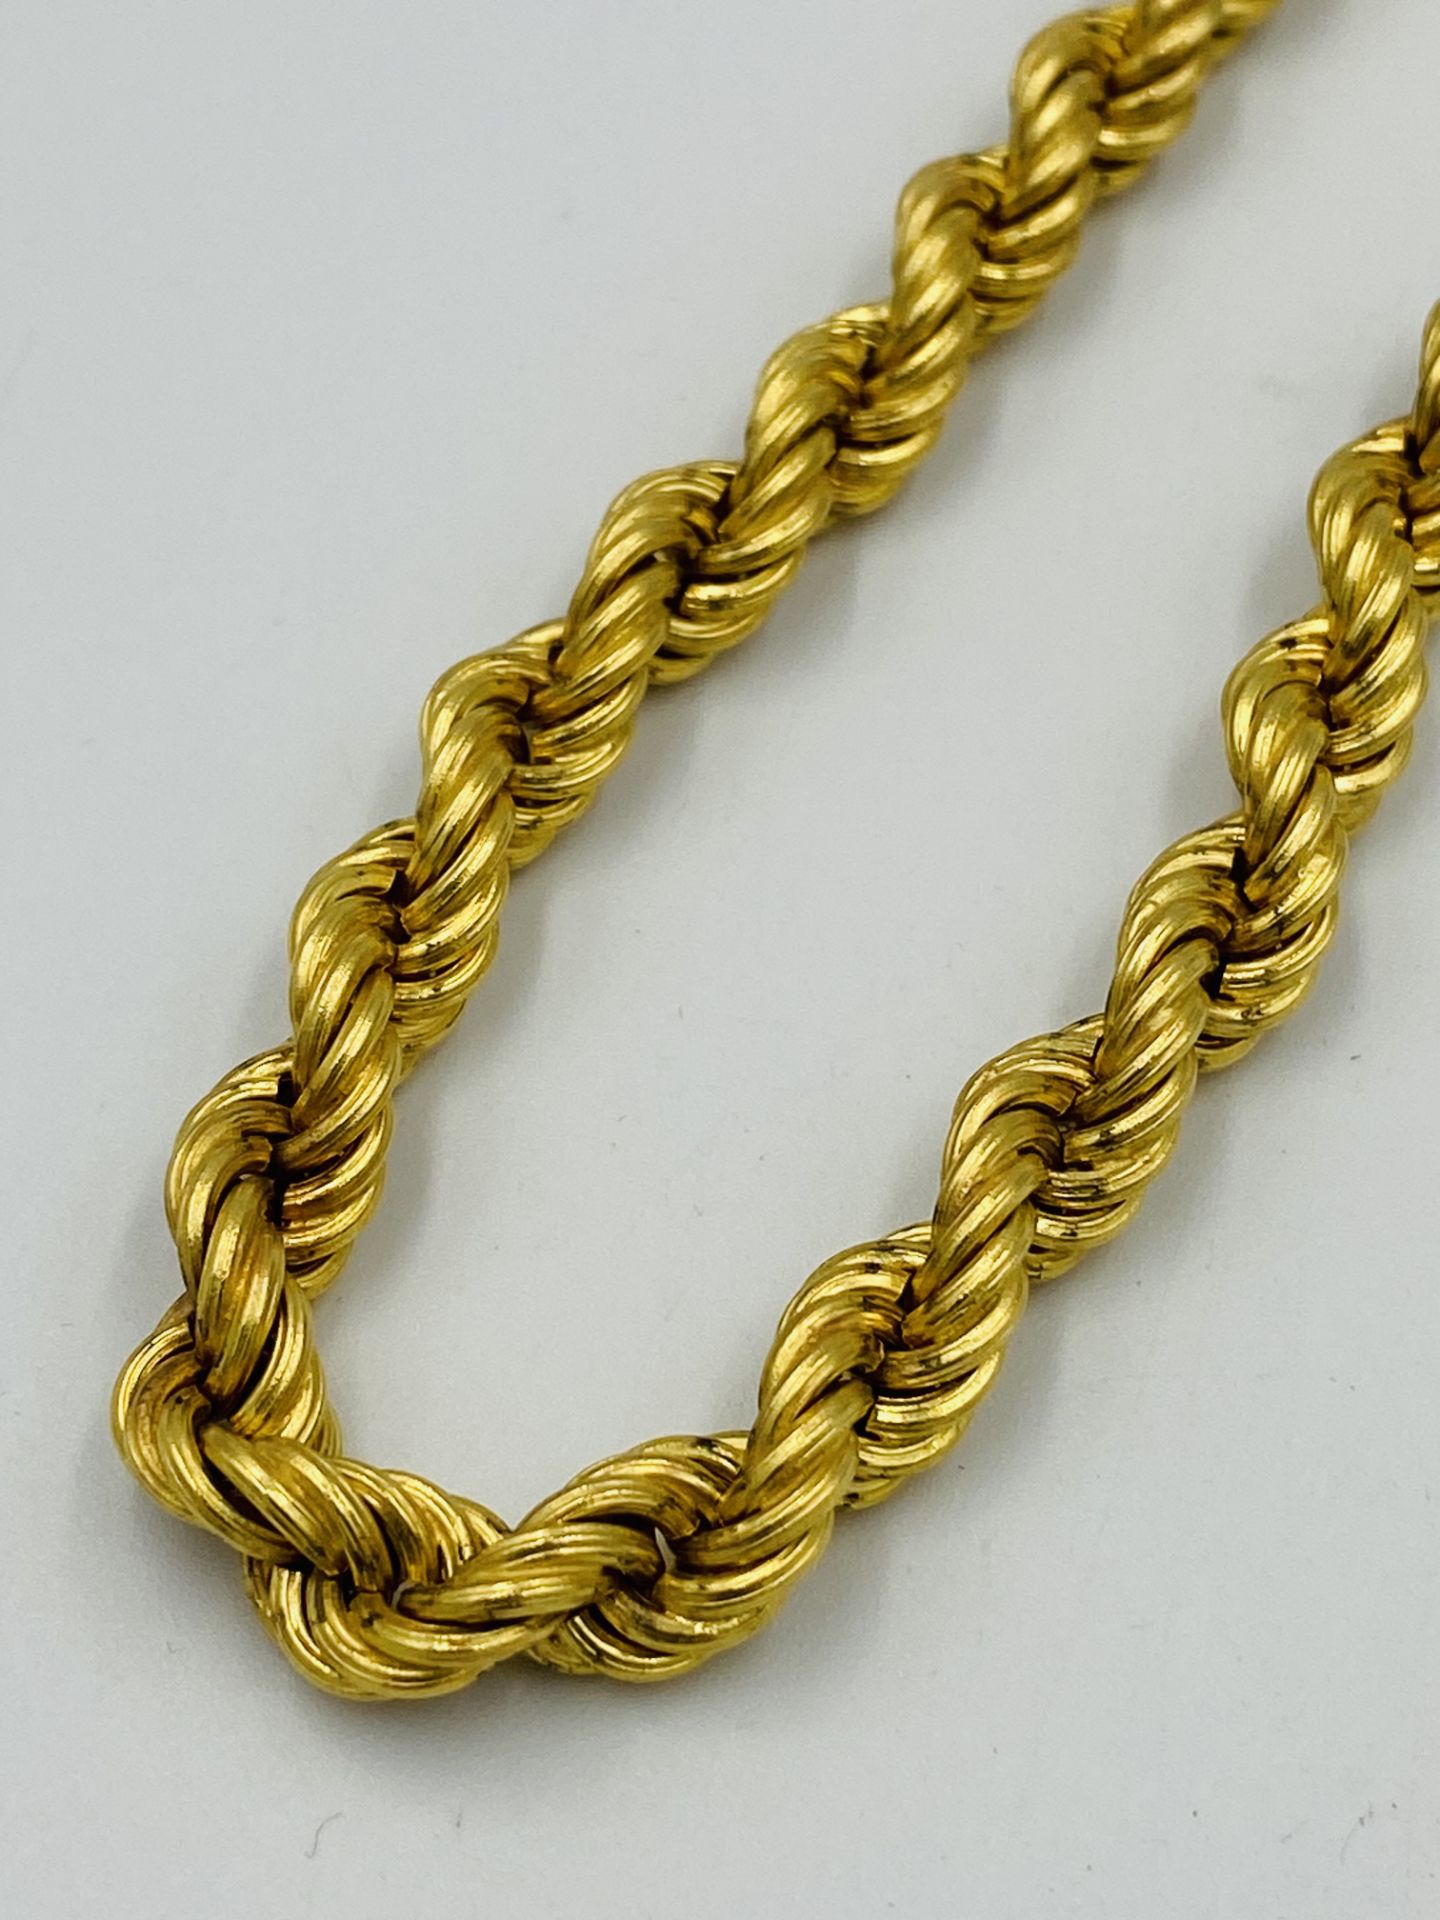 18ct gold rope twist necklace - Image 2 of 5